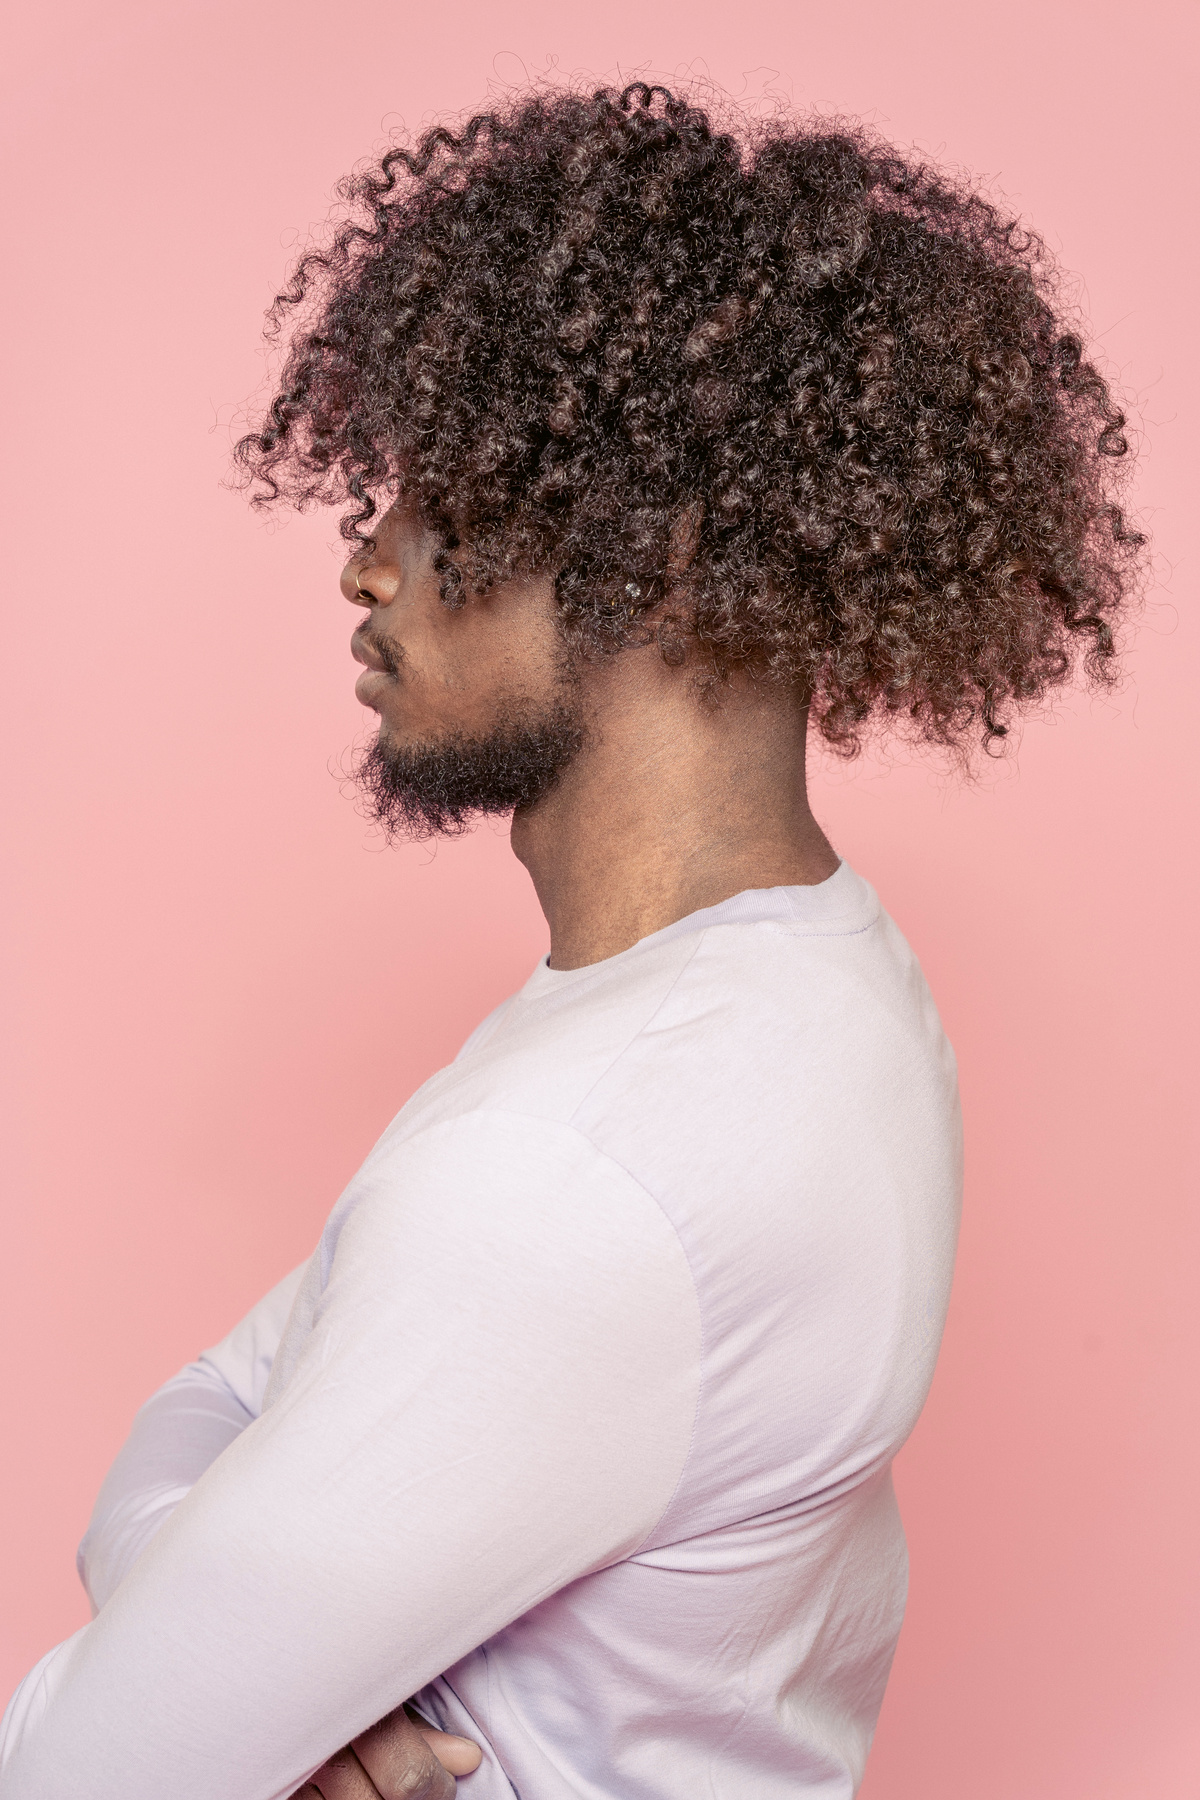 Serious black man with curly hair in studio